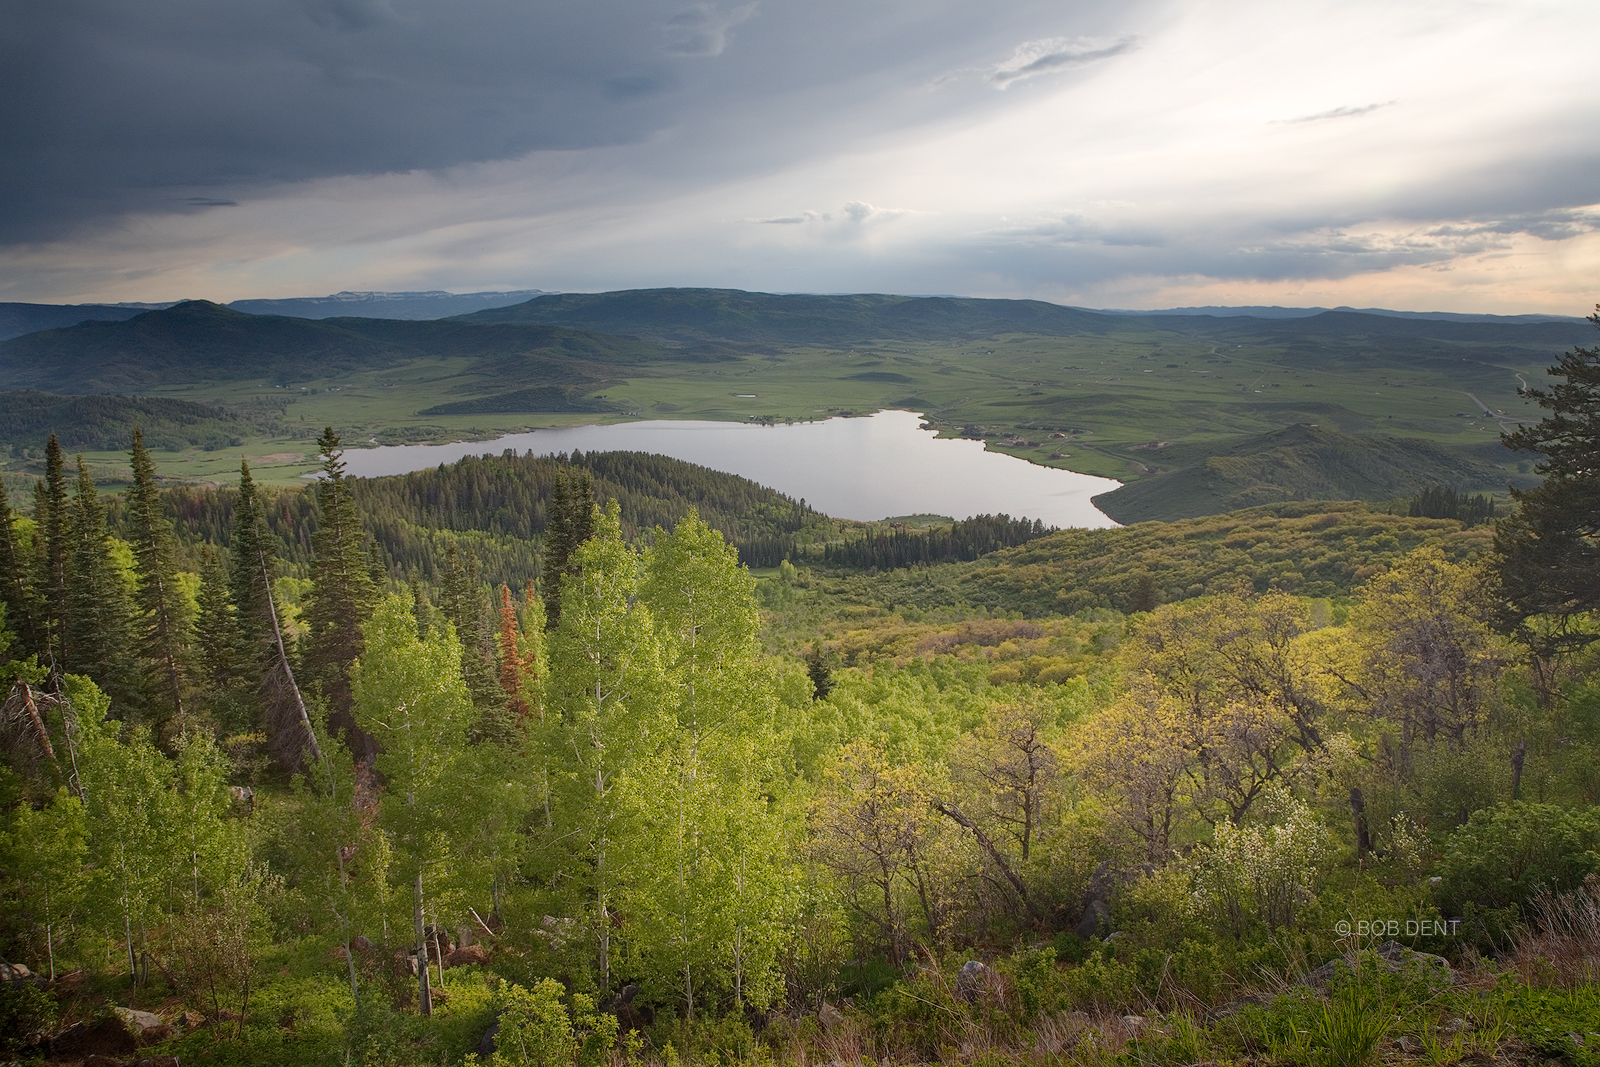 View from Lake Catamount to the Flat Tops Wilderness, along the Yampa River, near Steamboat Springs, Colorado.